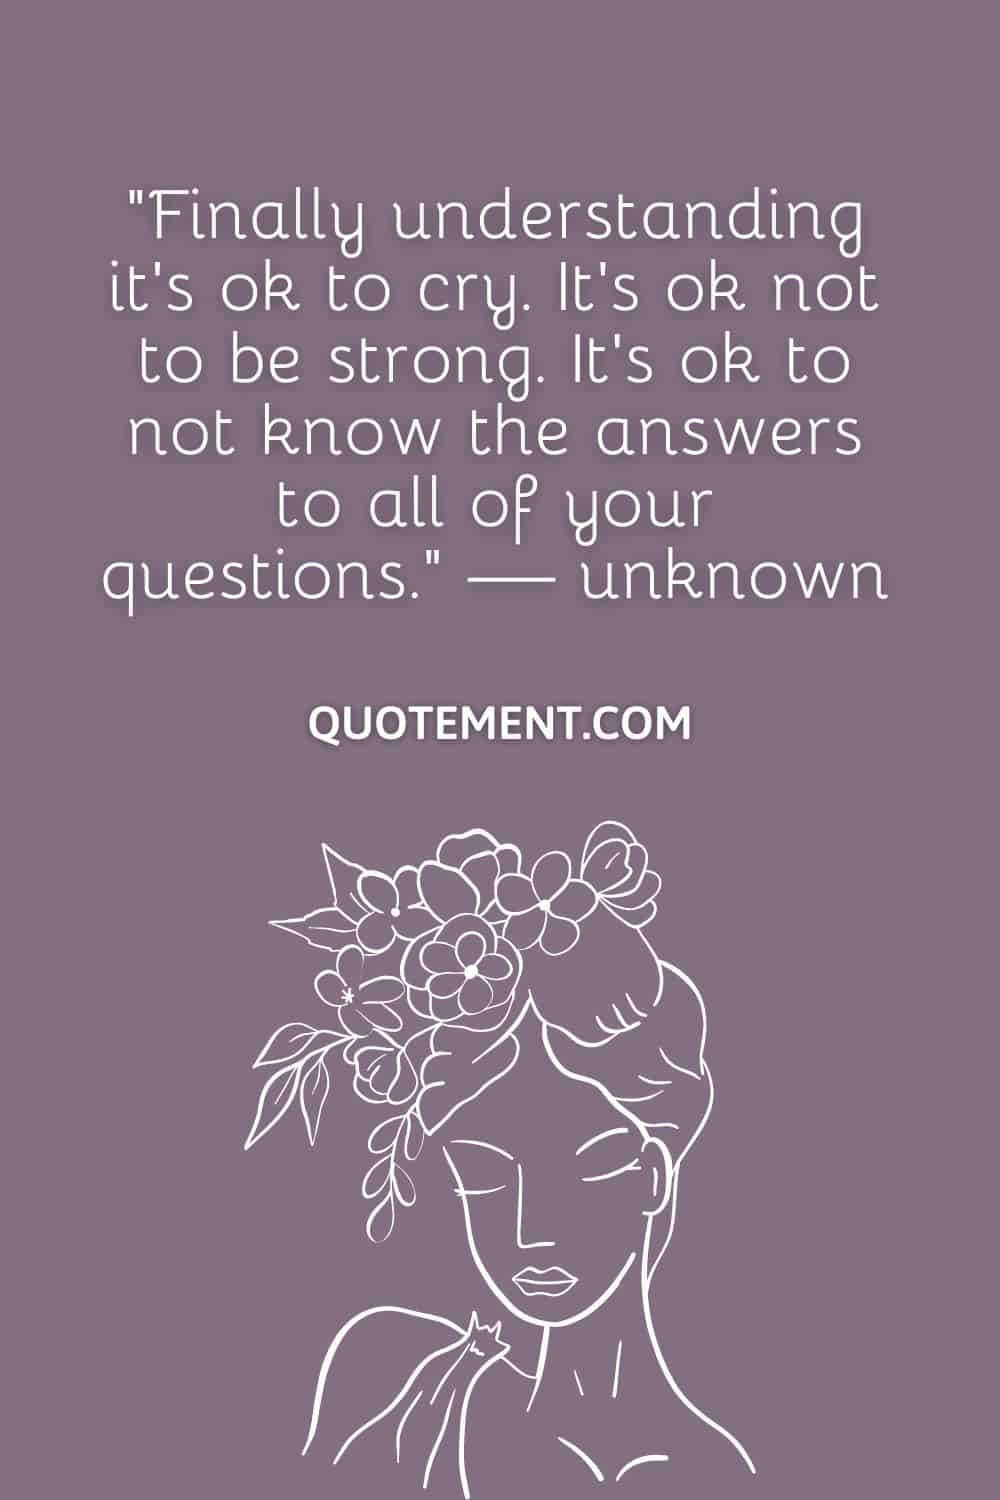 Finally understanding it’s ok to cry.